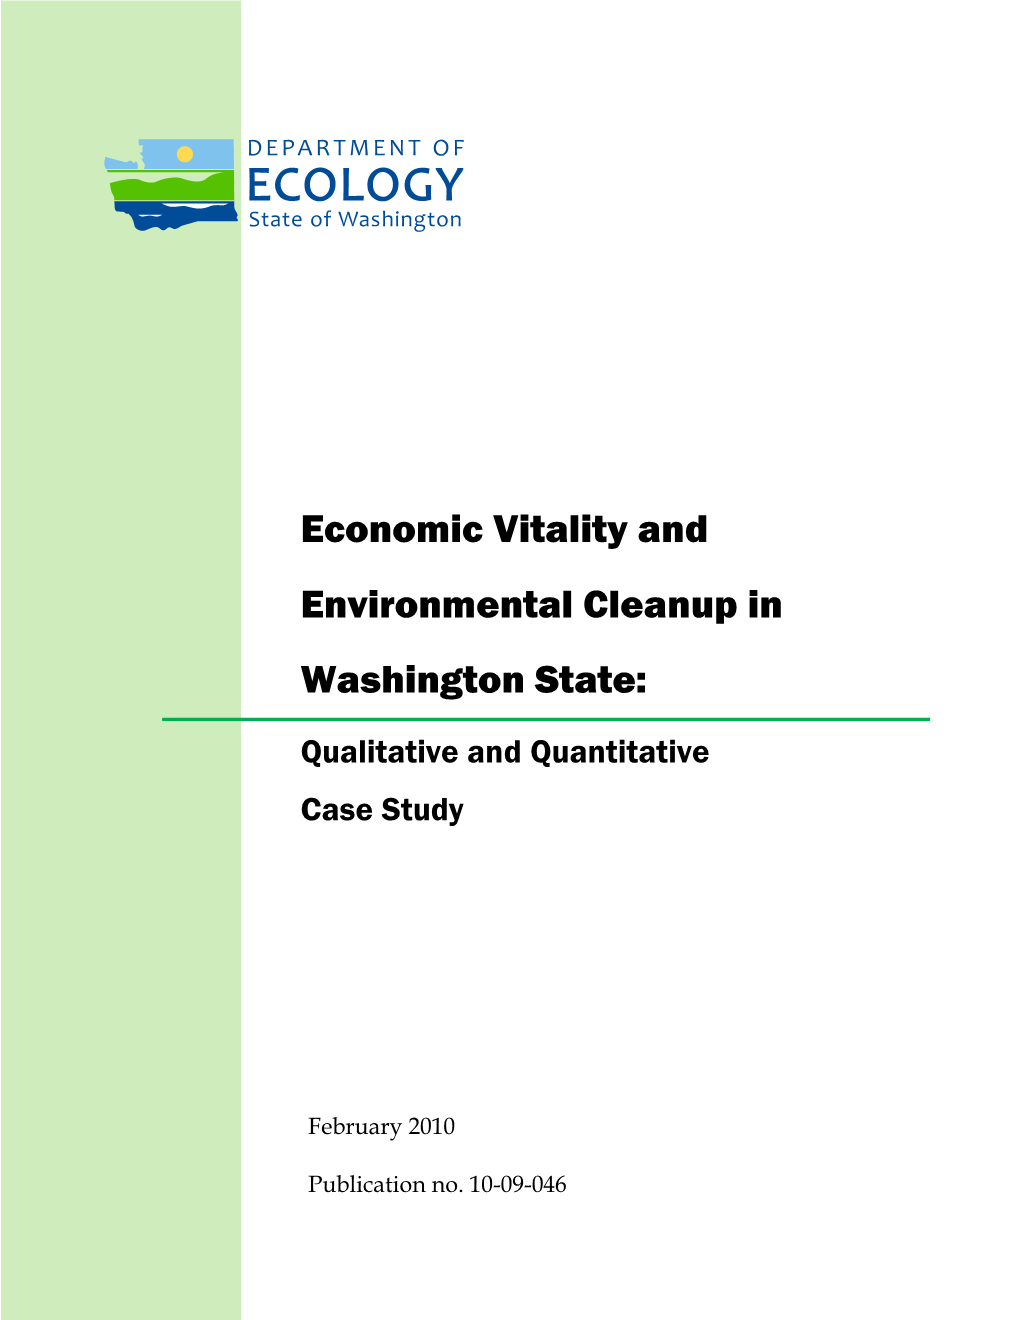 Economic Vitality and Environmental Cleanup in Washington State